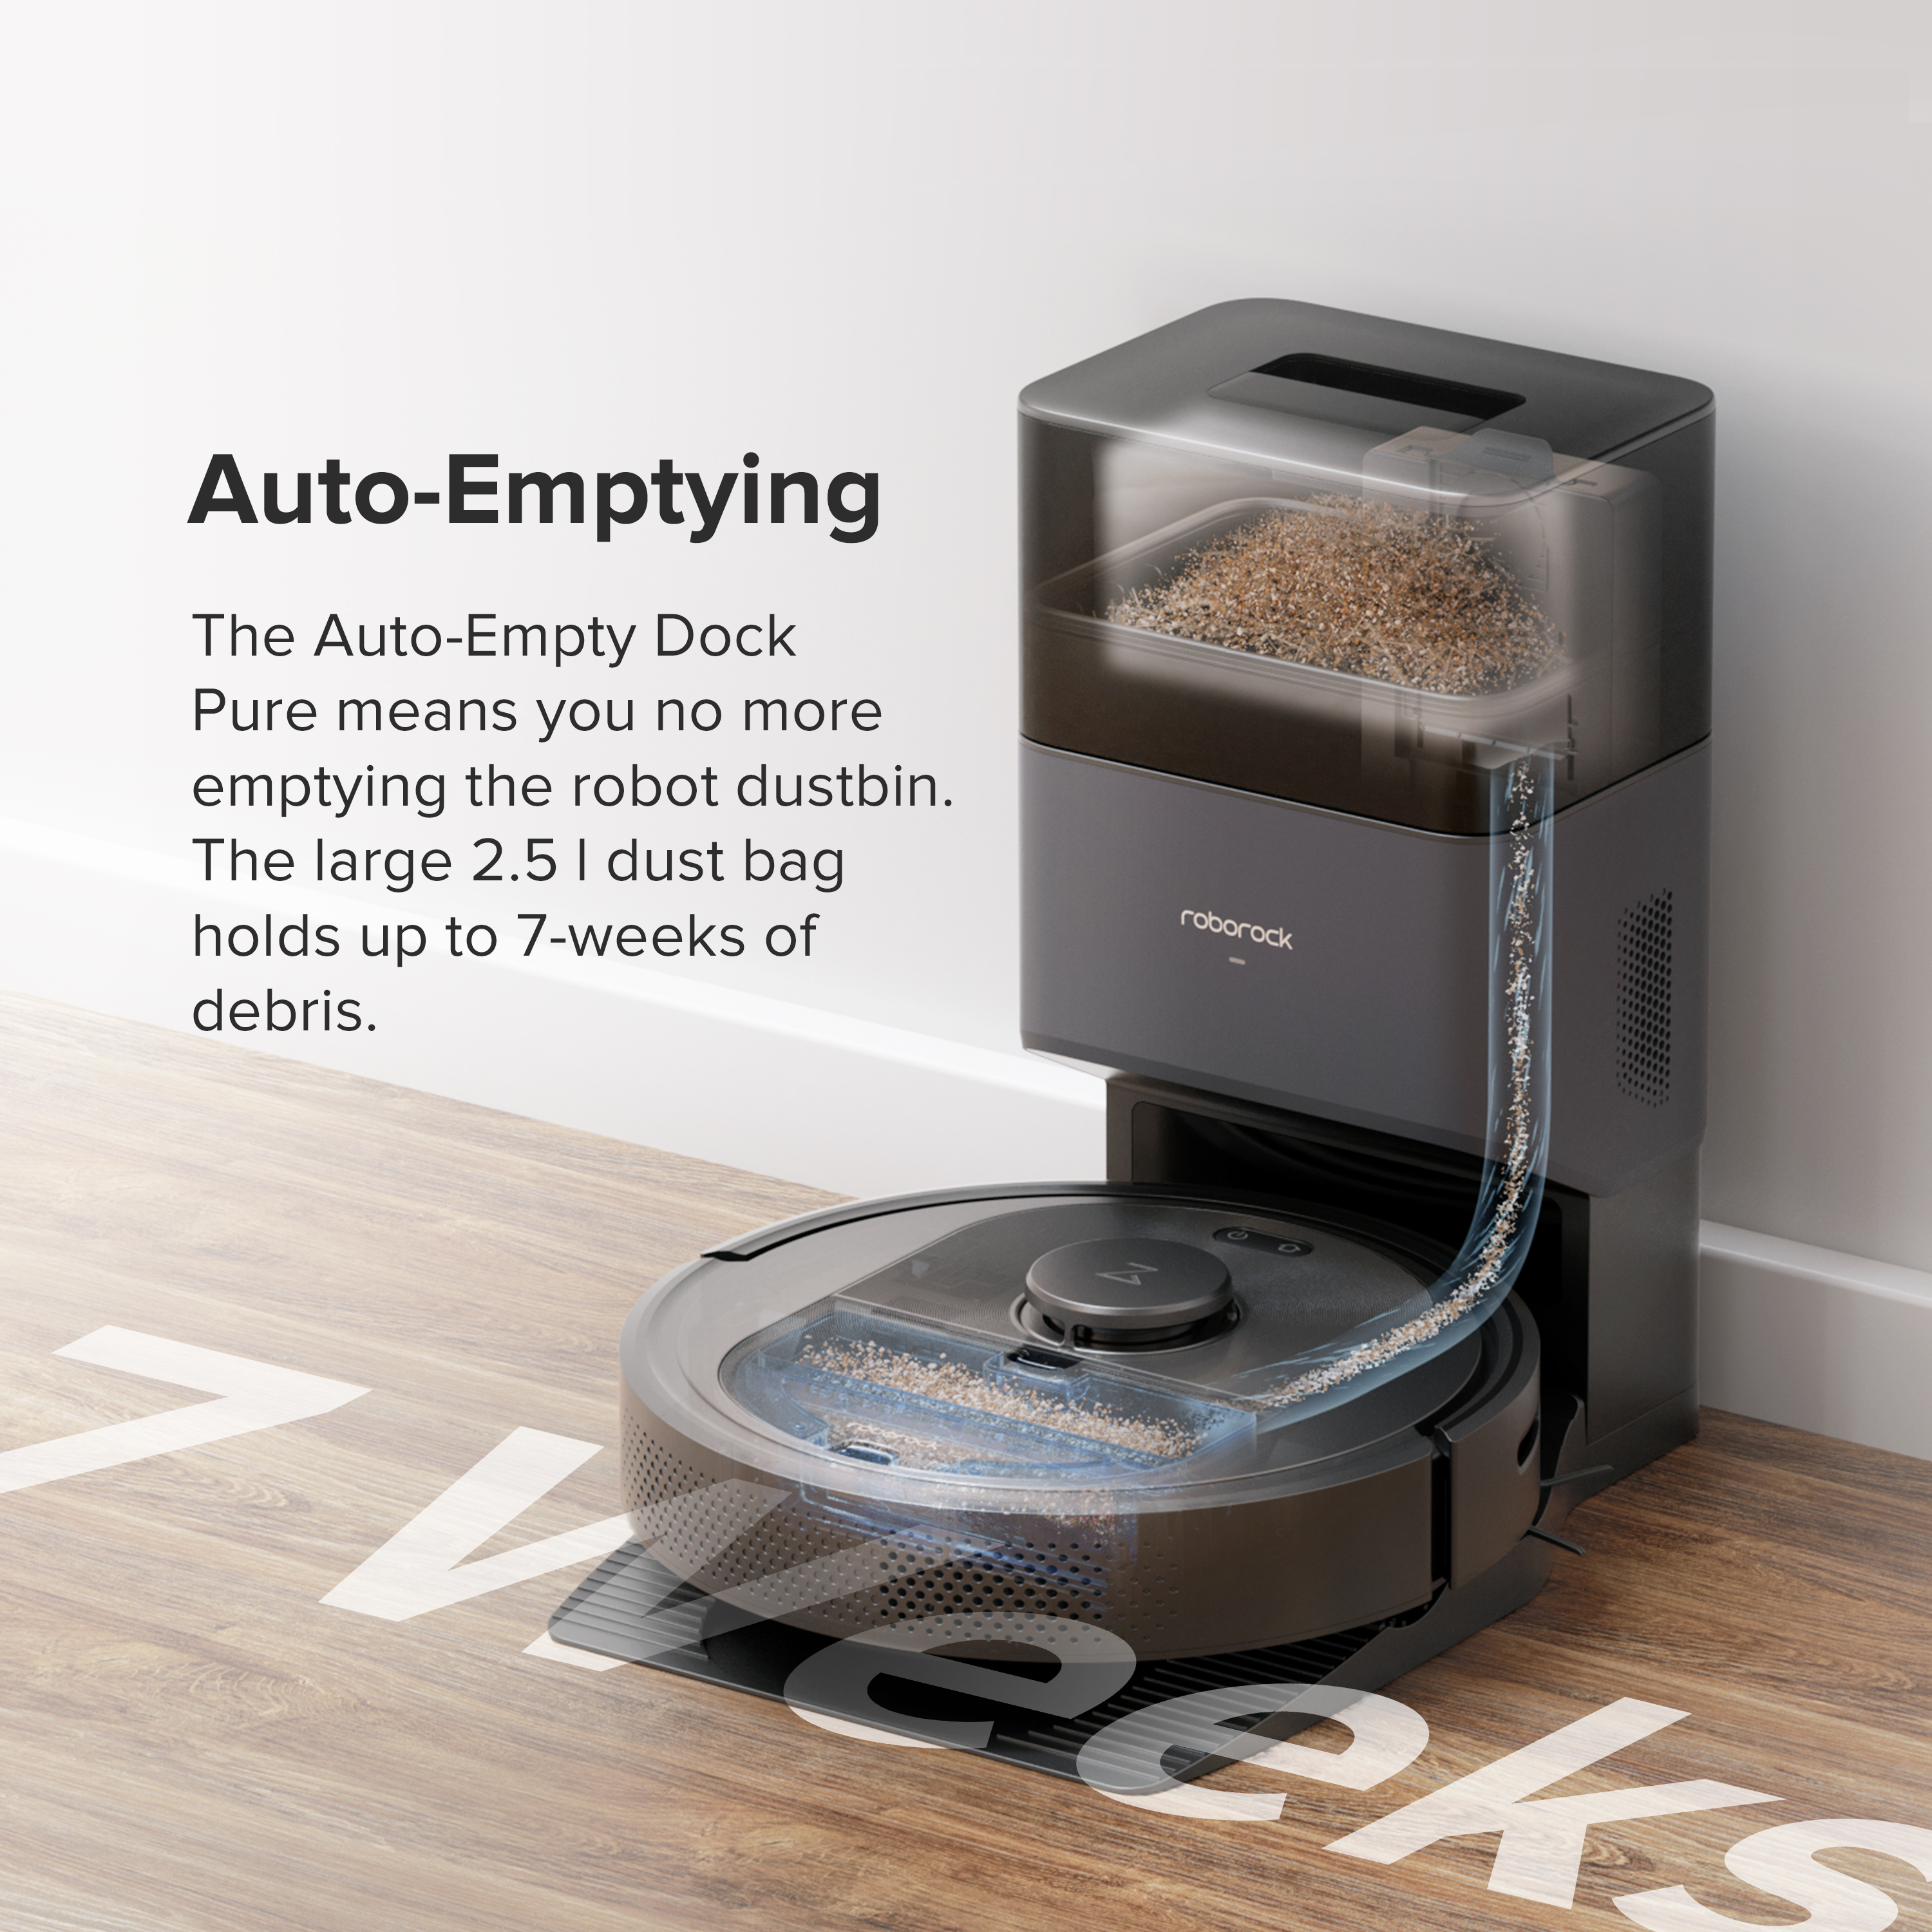 Roborock® Q5+ Auto Emptying Robot Vacuum Cleaner, 2700 Pa Suction Power, with App Control - image 3 of 15